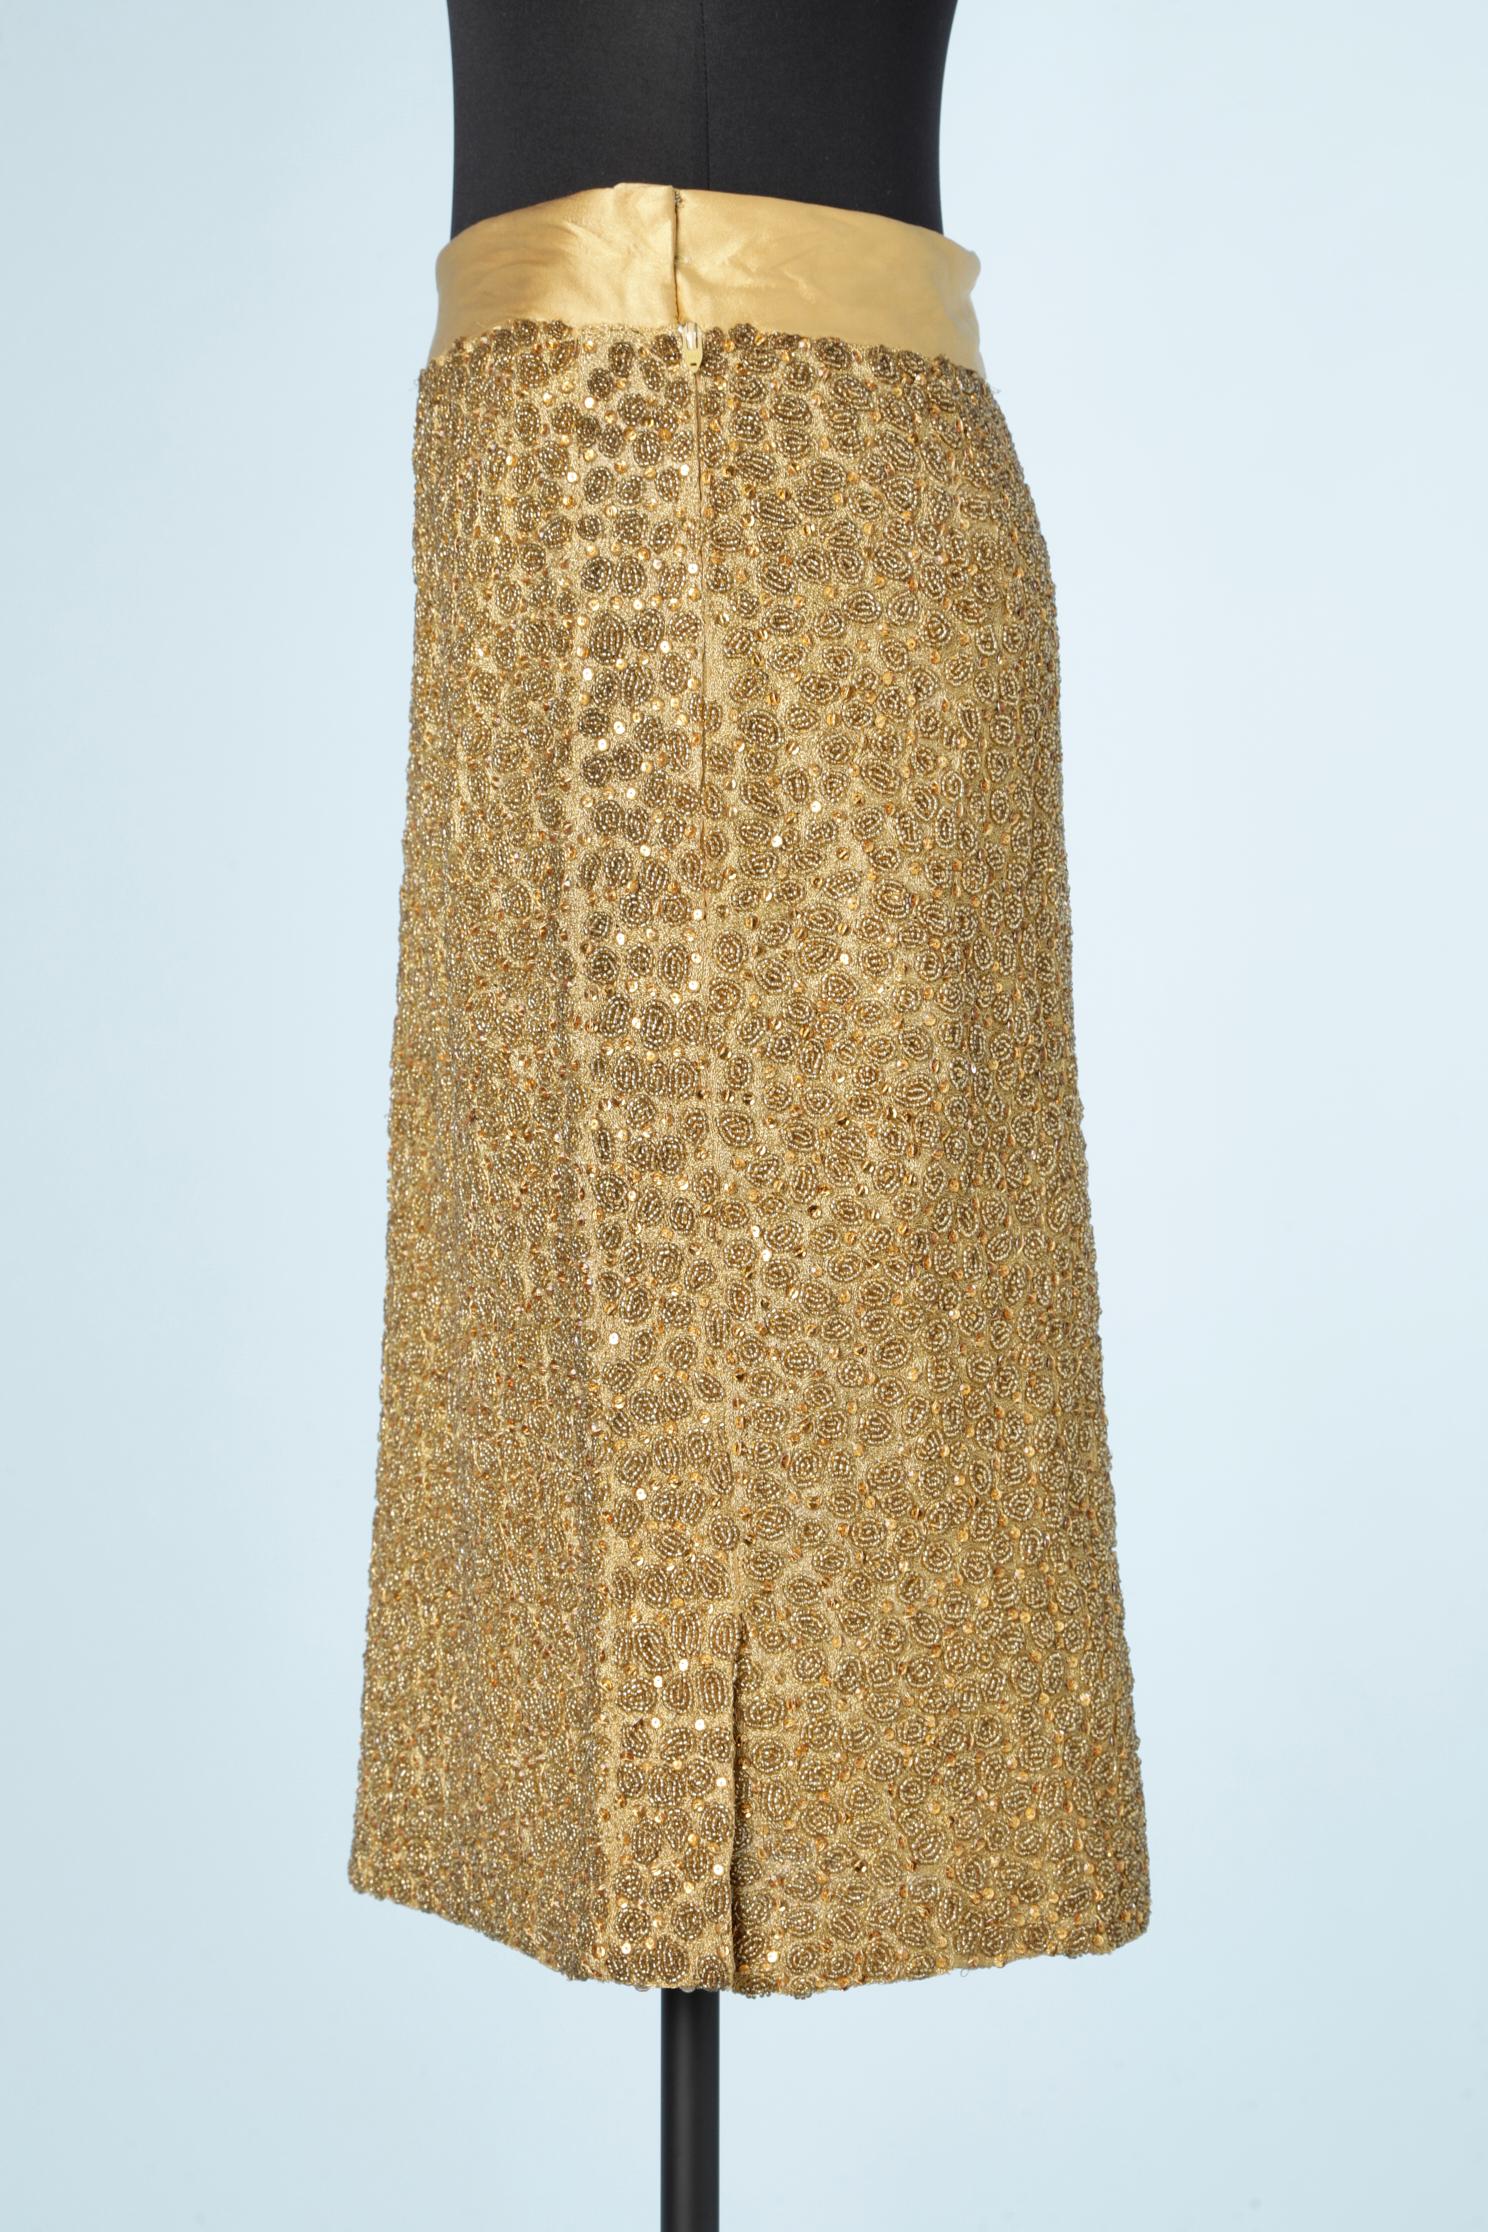 Gold embroidered pencil skirt  and yellow gold satin belt Gianni Versace  In Excellent Condition For Sale In Saint-Ouen-Sur-Seine, FR